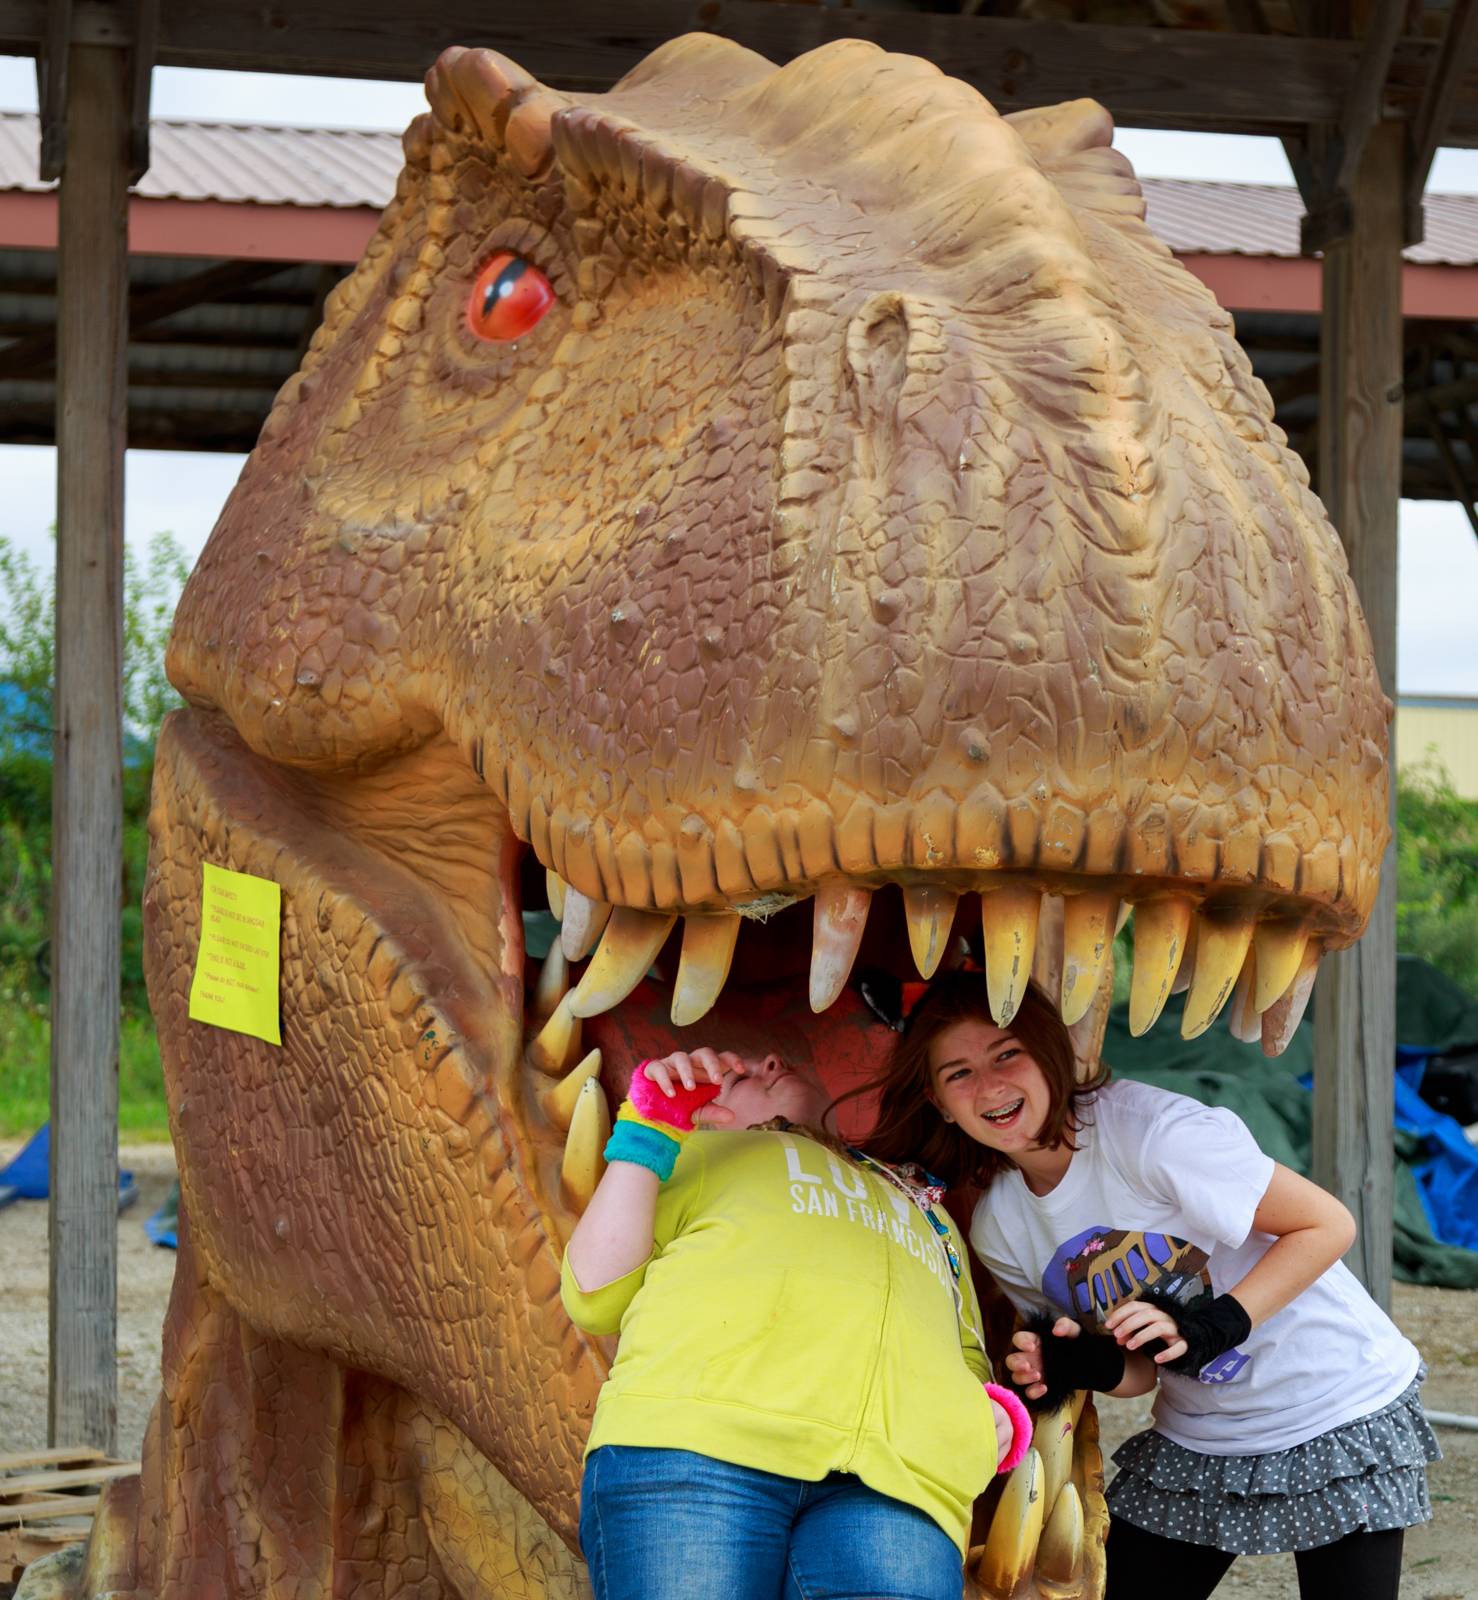 A quest of Tyrannosauric proportions: Jurassic Quest comes to Illinois